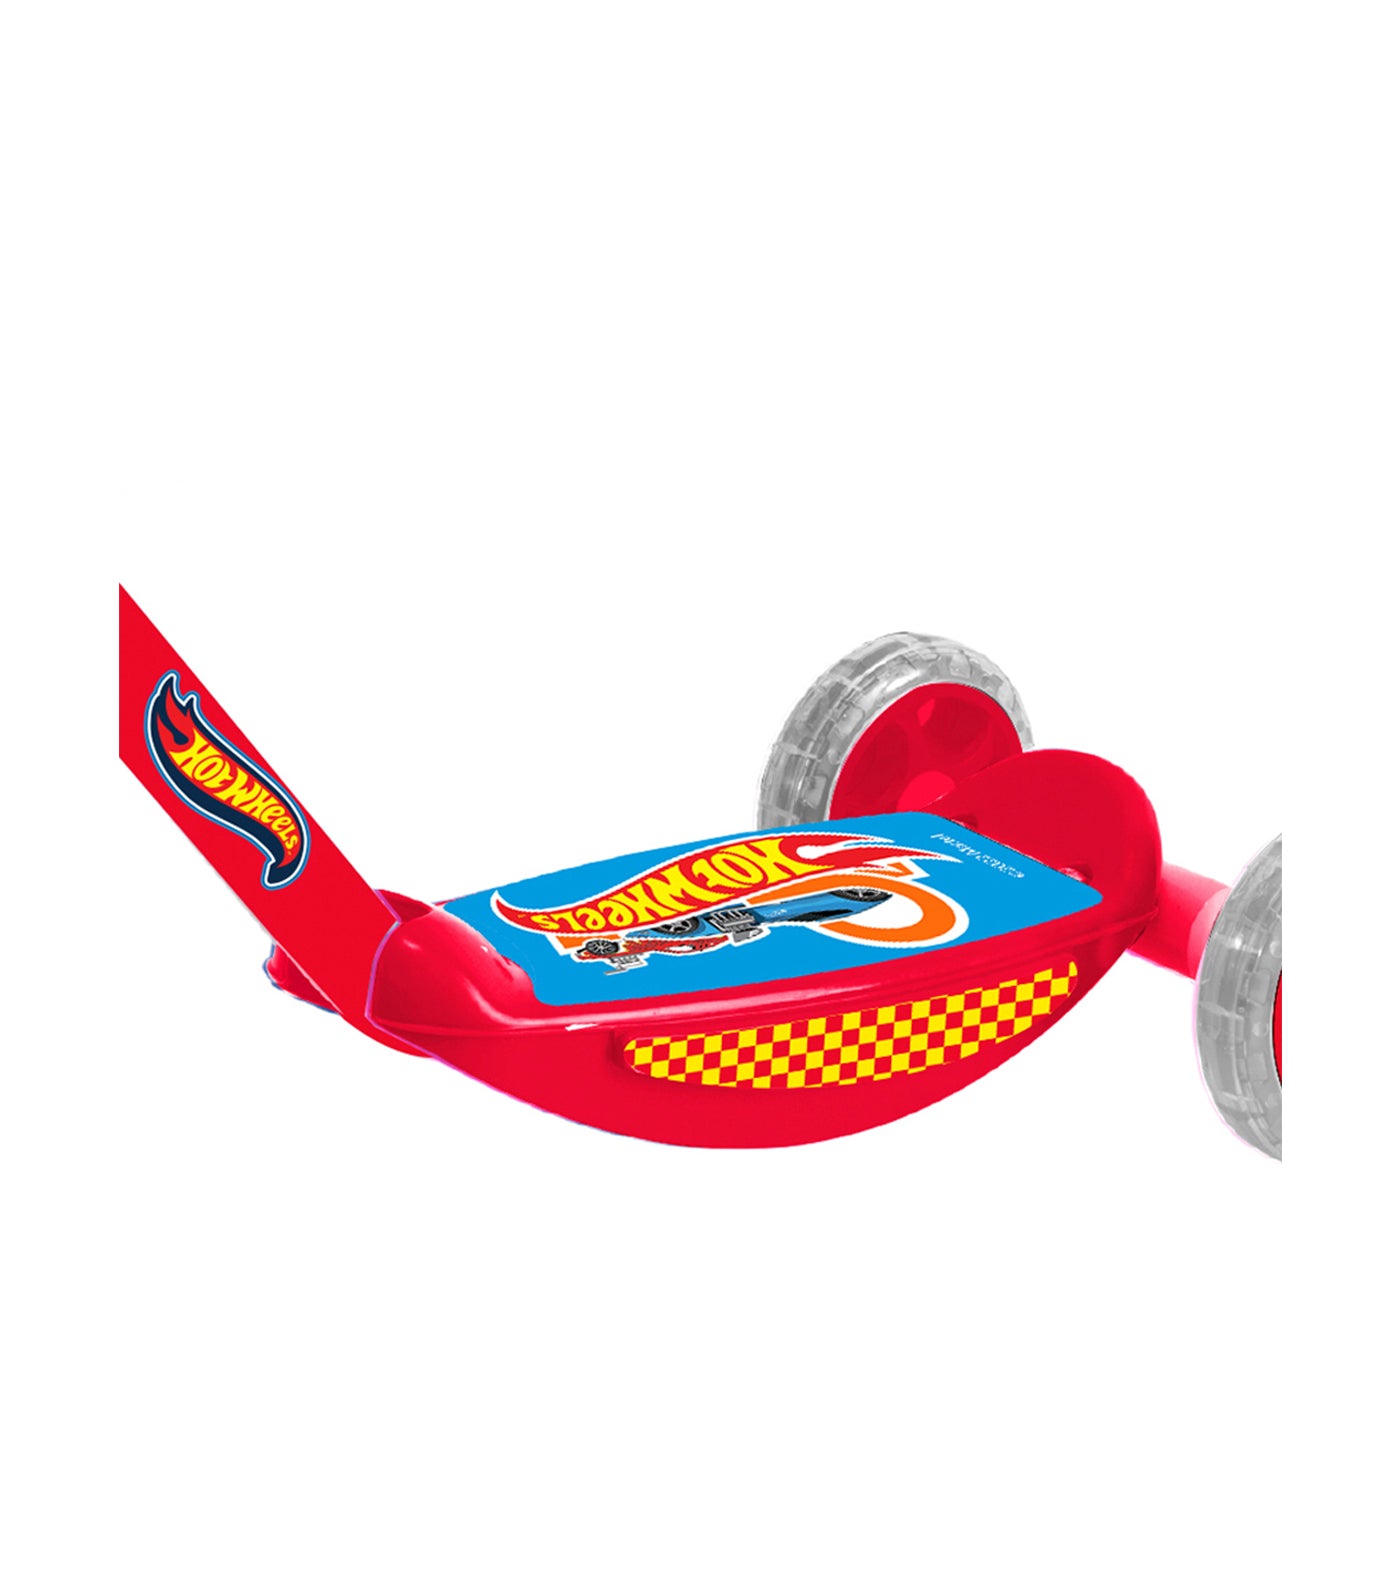 Hot Wheels Tri-Scooter - Red